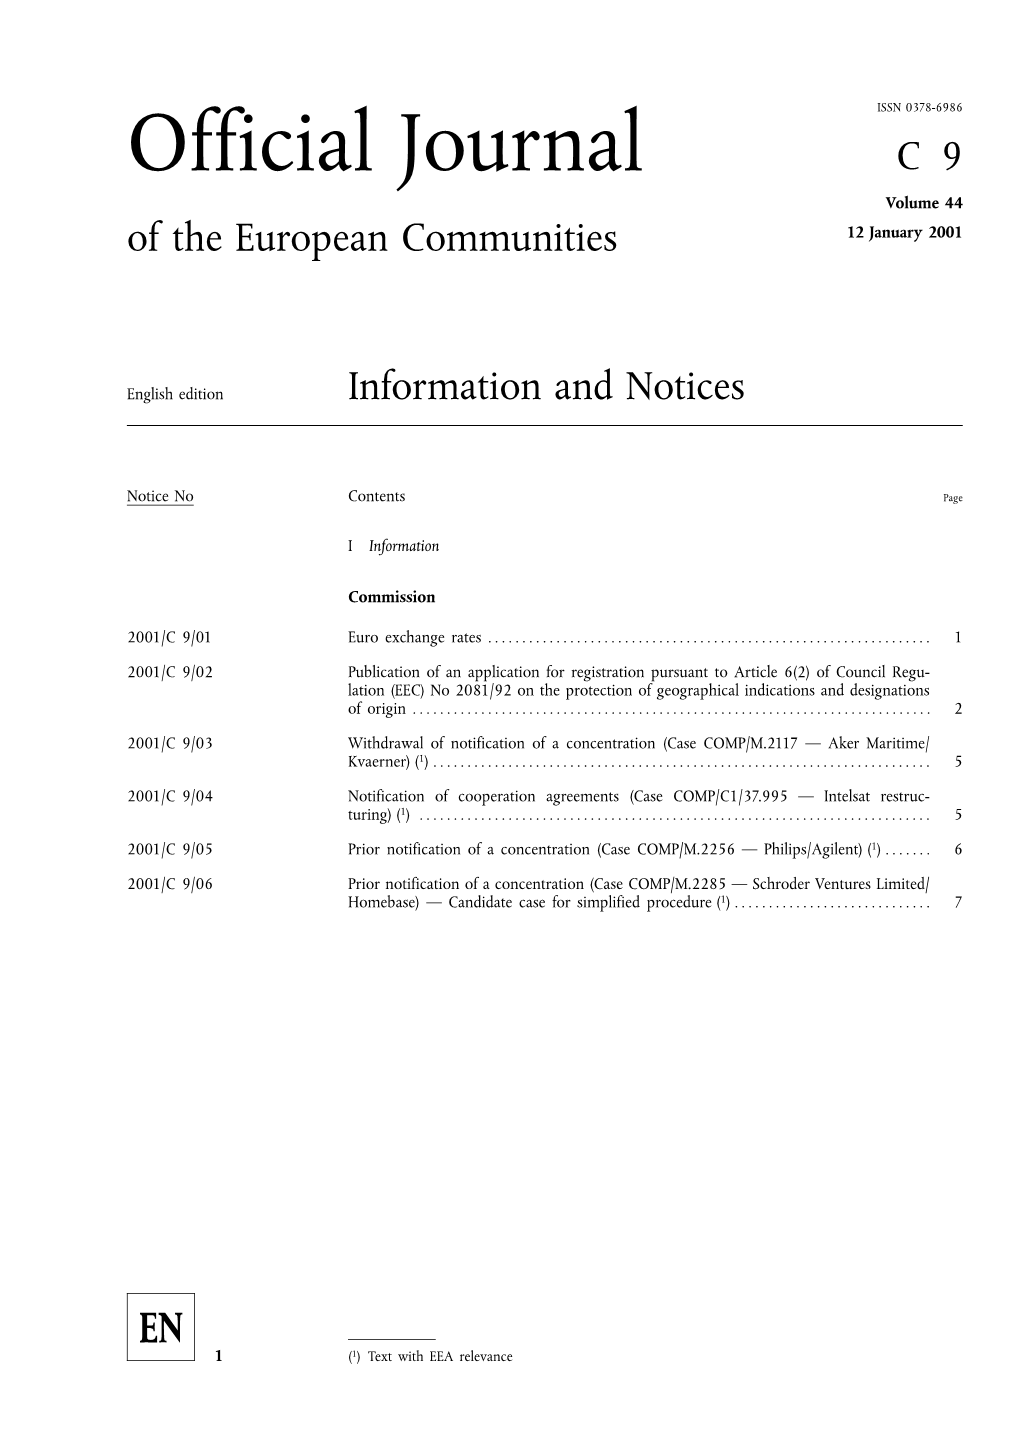 Official Journal C9 Volume 44 of the European Communities 12 January 2001